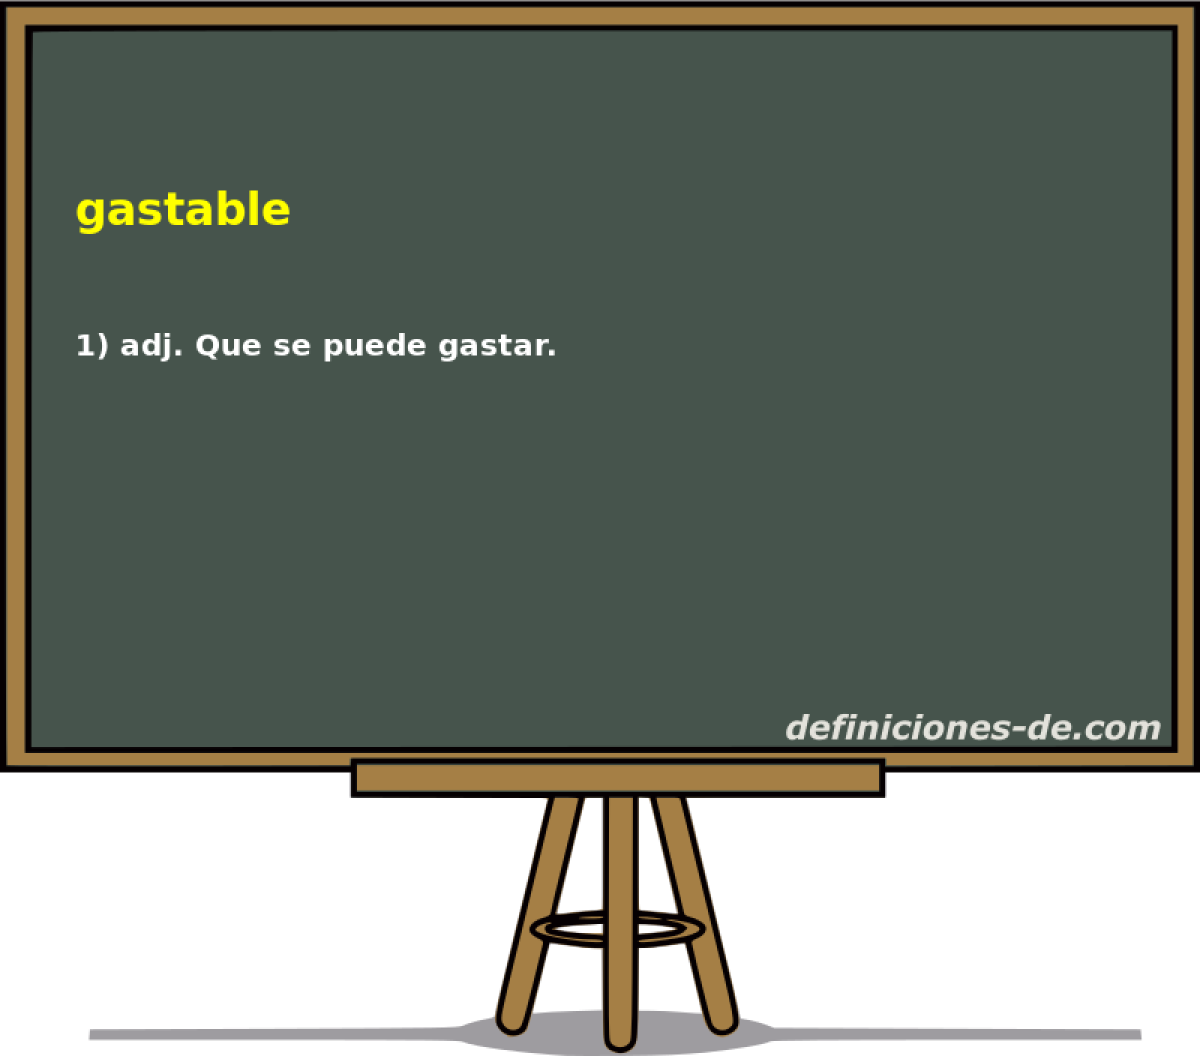 gastable 